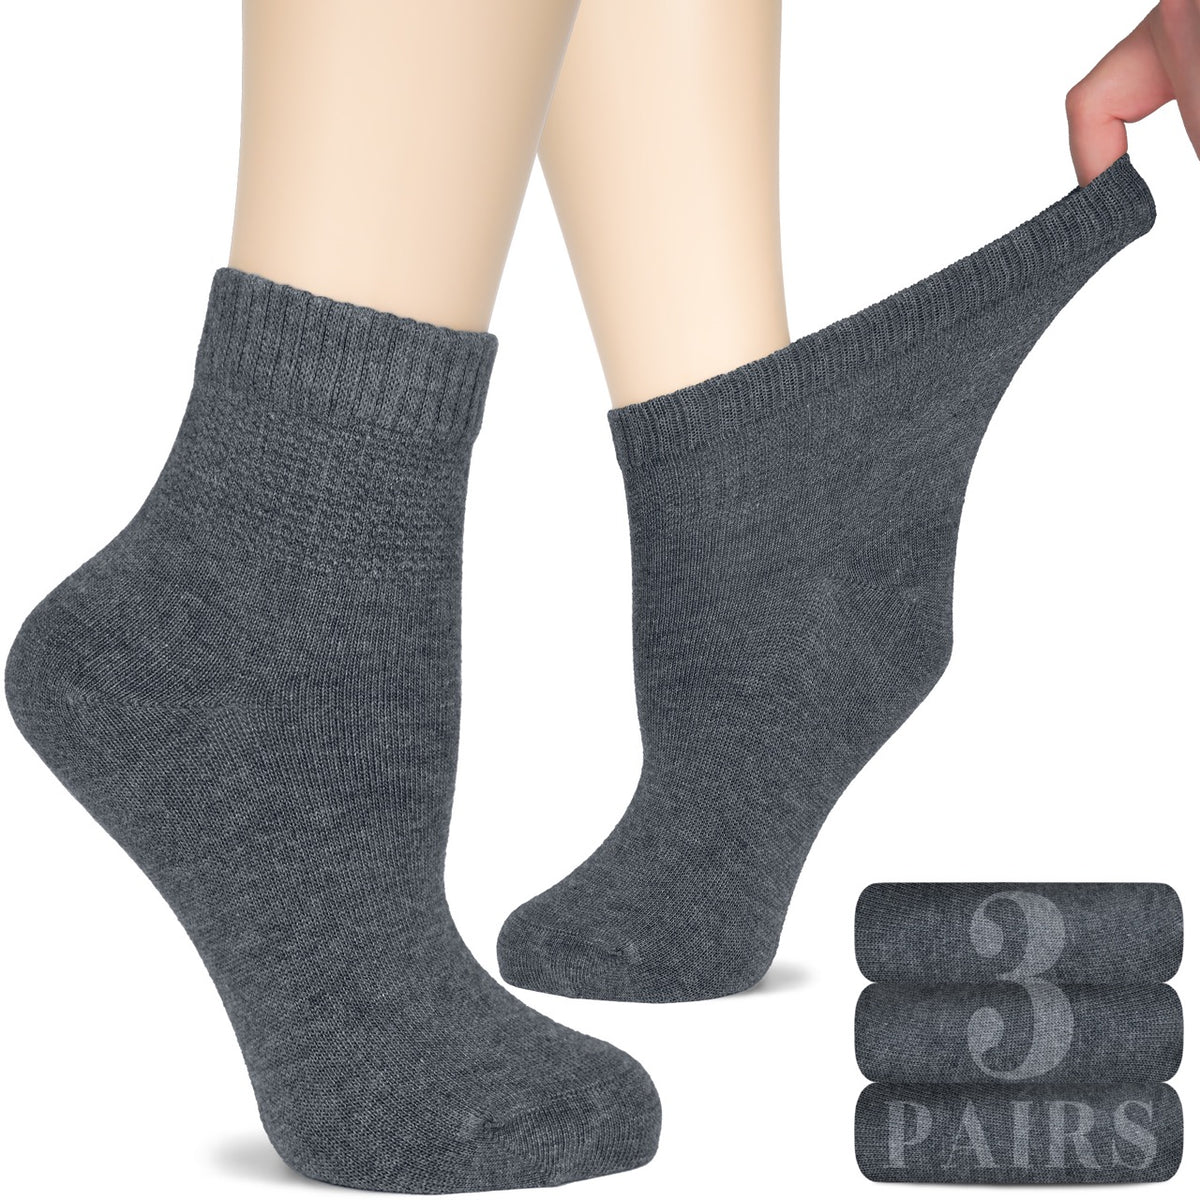 Women's Comfortable Diabetic Bamboo Ankle Socks for Swollen Legs, 3 Pairs